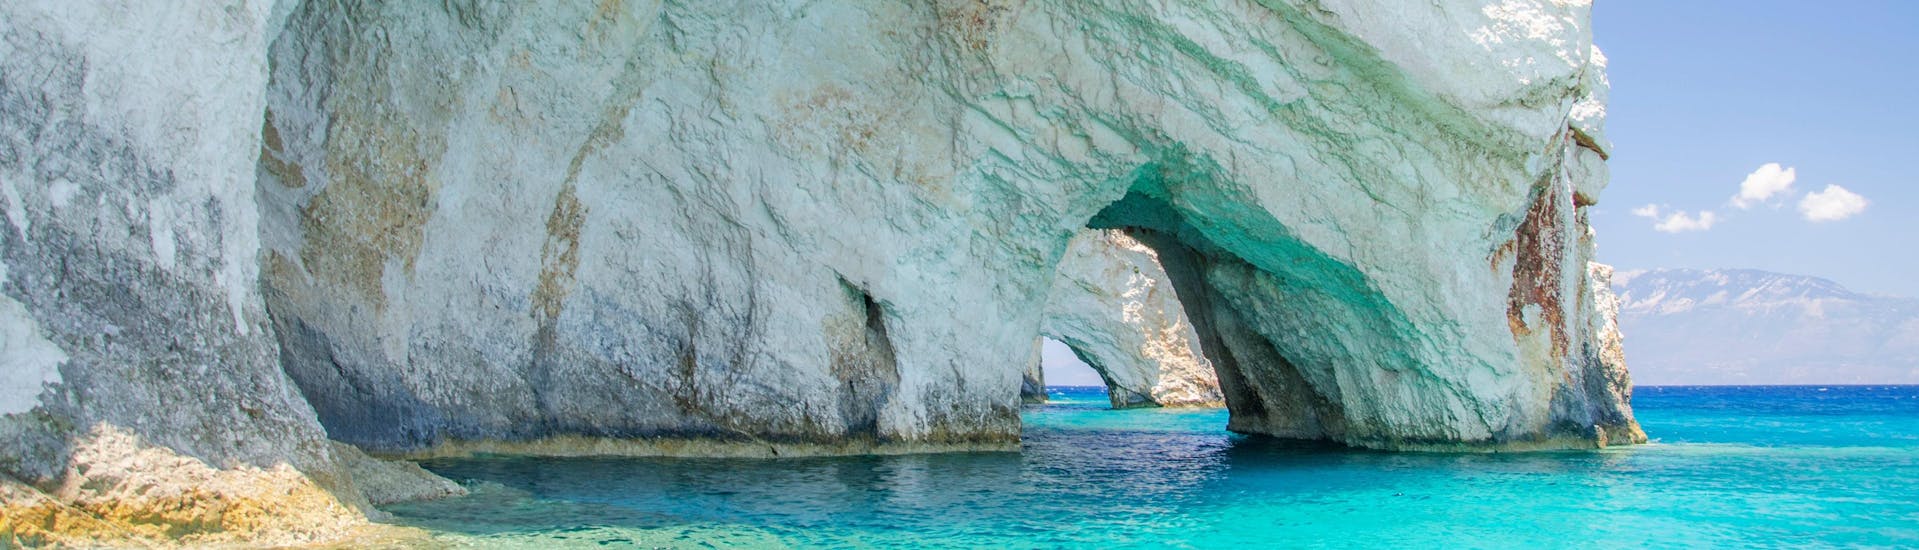 The stunning Blue Caves, a popular destination for boat trips in Zakynthos.